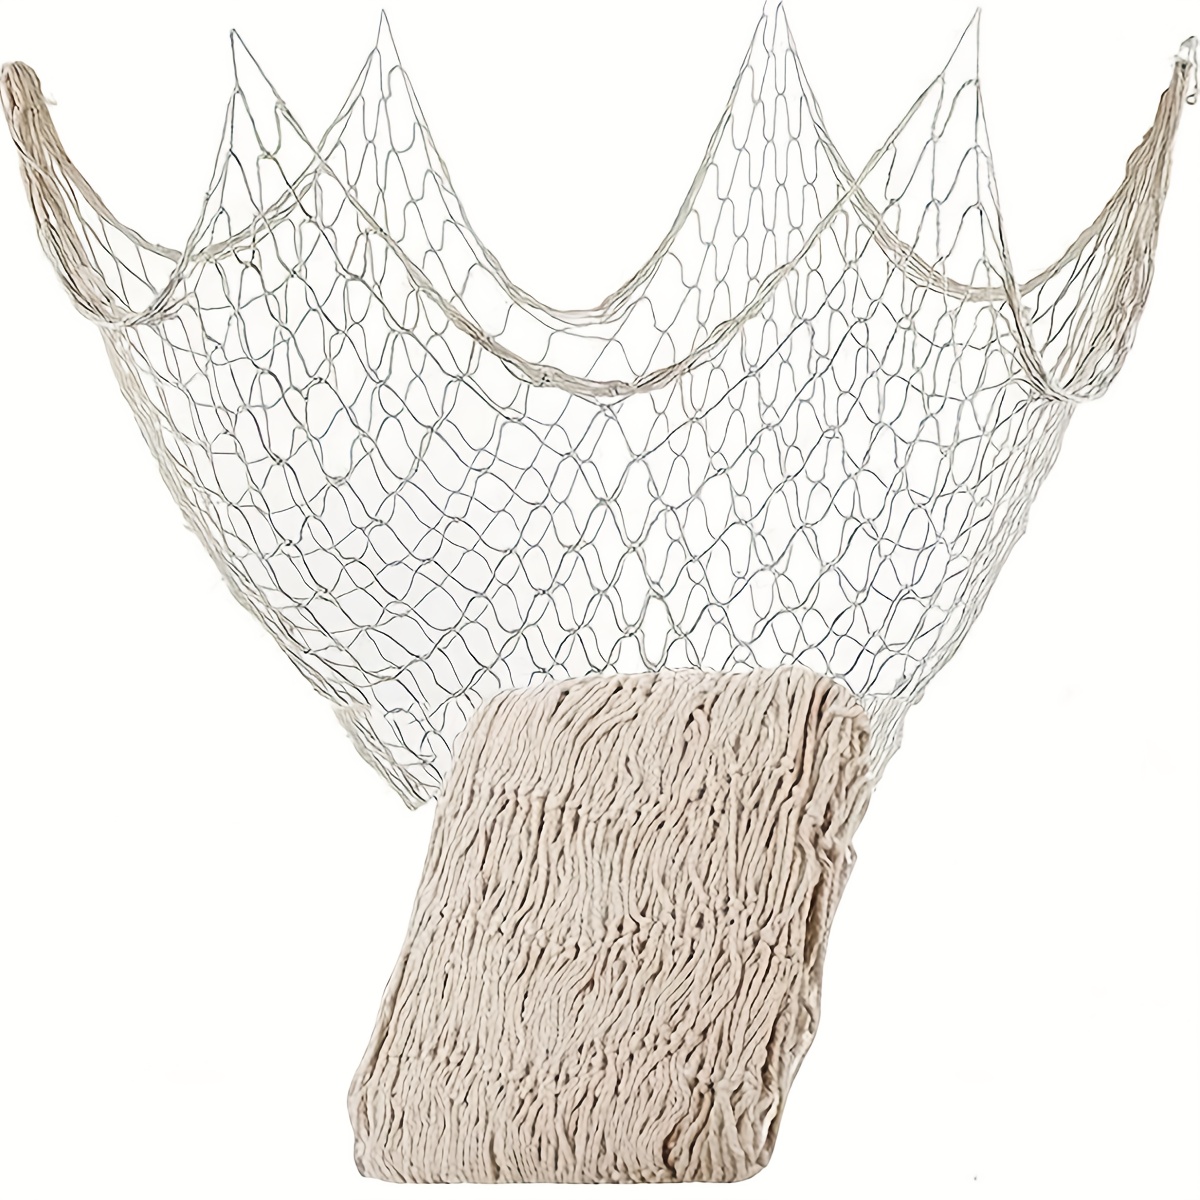 

1 Pack Beige Fish Net Decoration, 80 X 40 Inch Mediterranean Decorated Fishing Net, Natural Fish Net Party Decoration For Pirate Party, Hawaiian Party, Nautical Theme Fishing Net Party Accessories